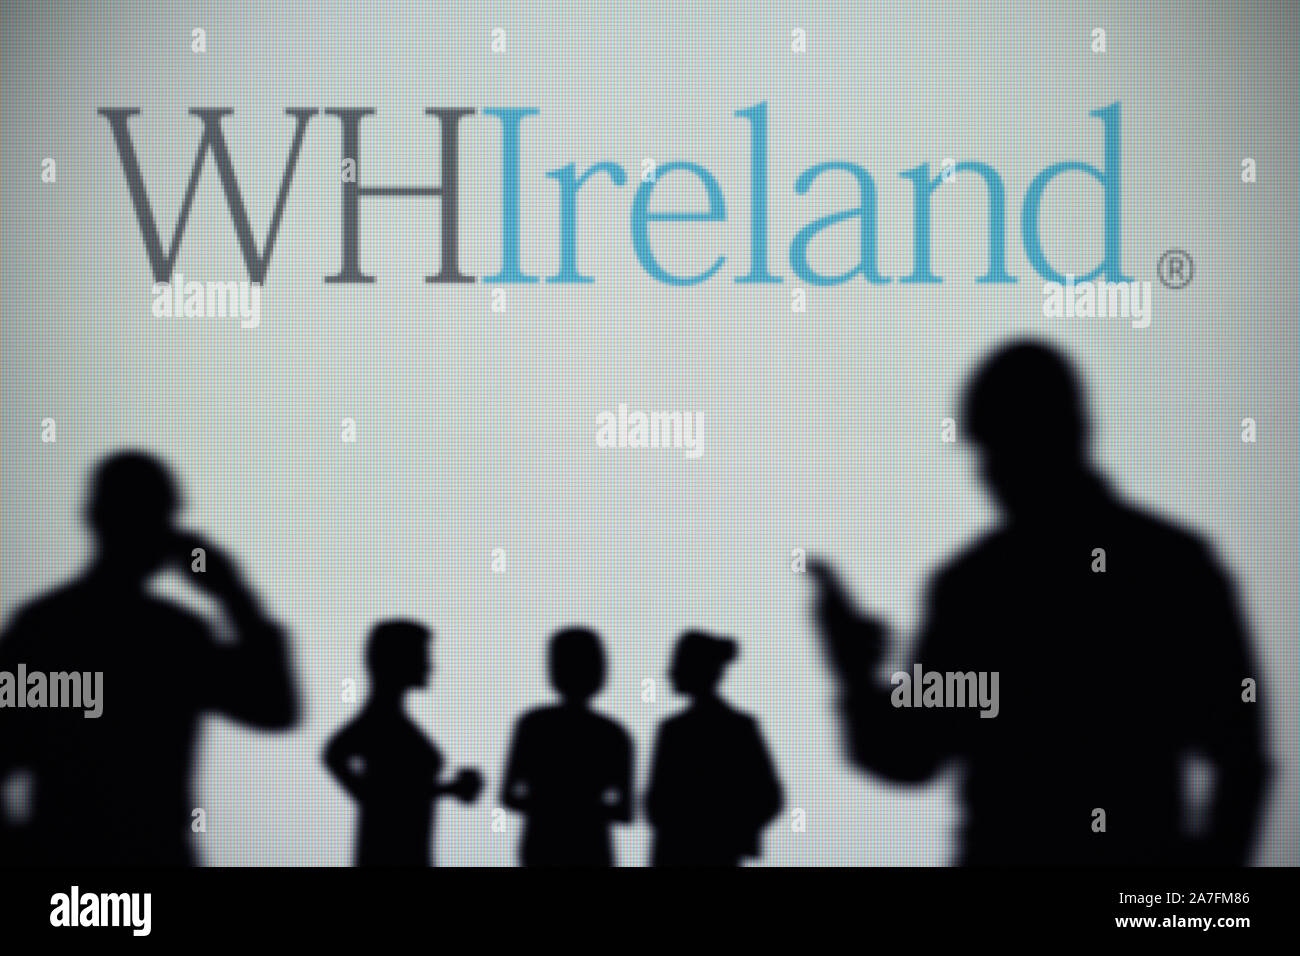 The WHIreland logo is seen on an LED screen in the background while a silhouetted person uses a smartphone (Editorial use only) Stock Photo